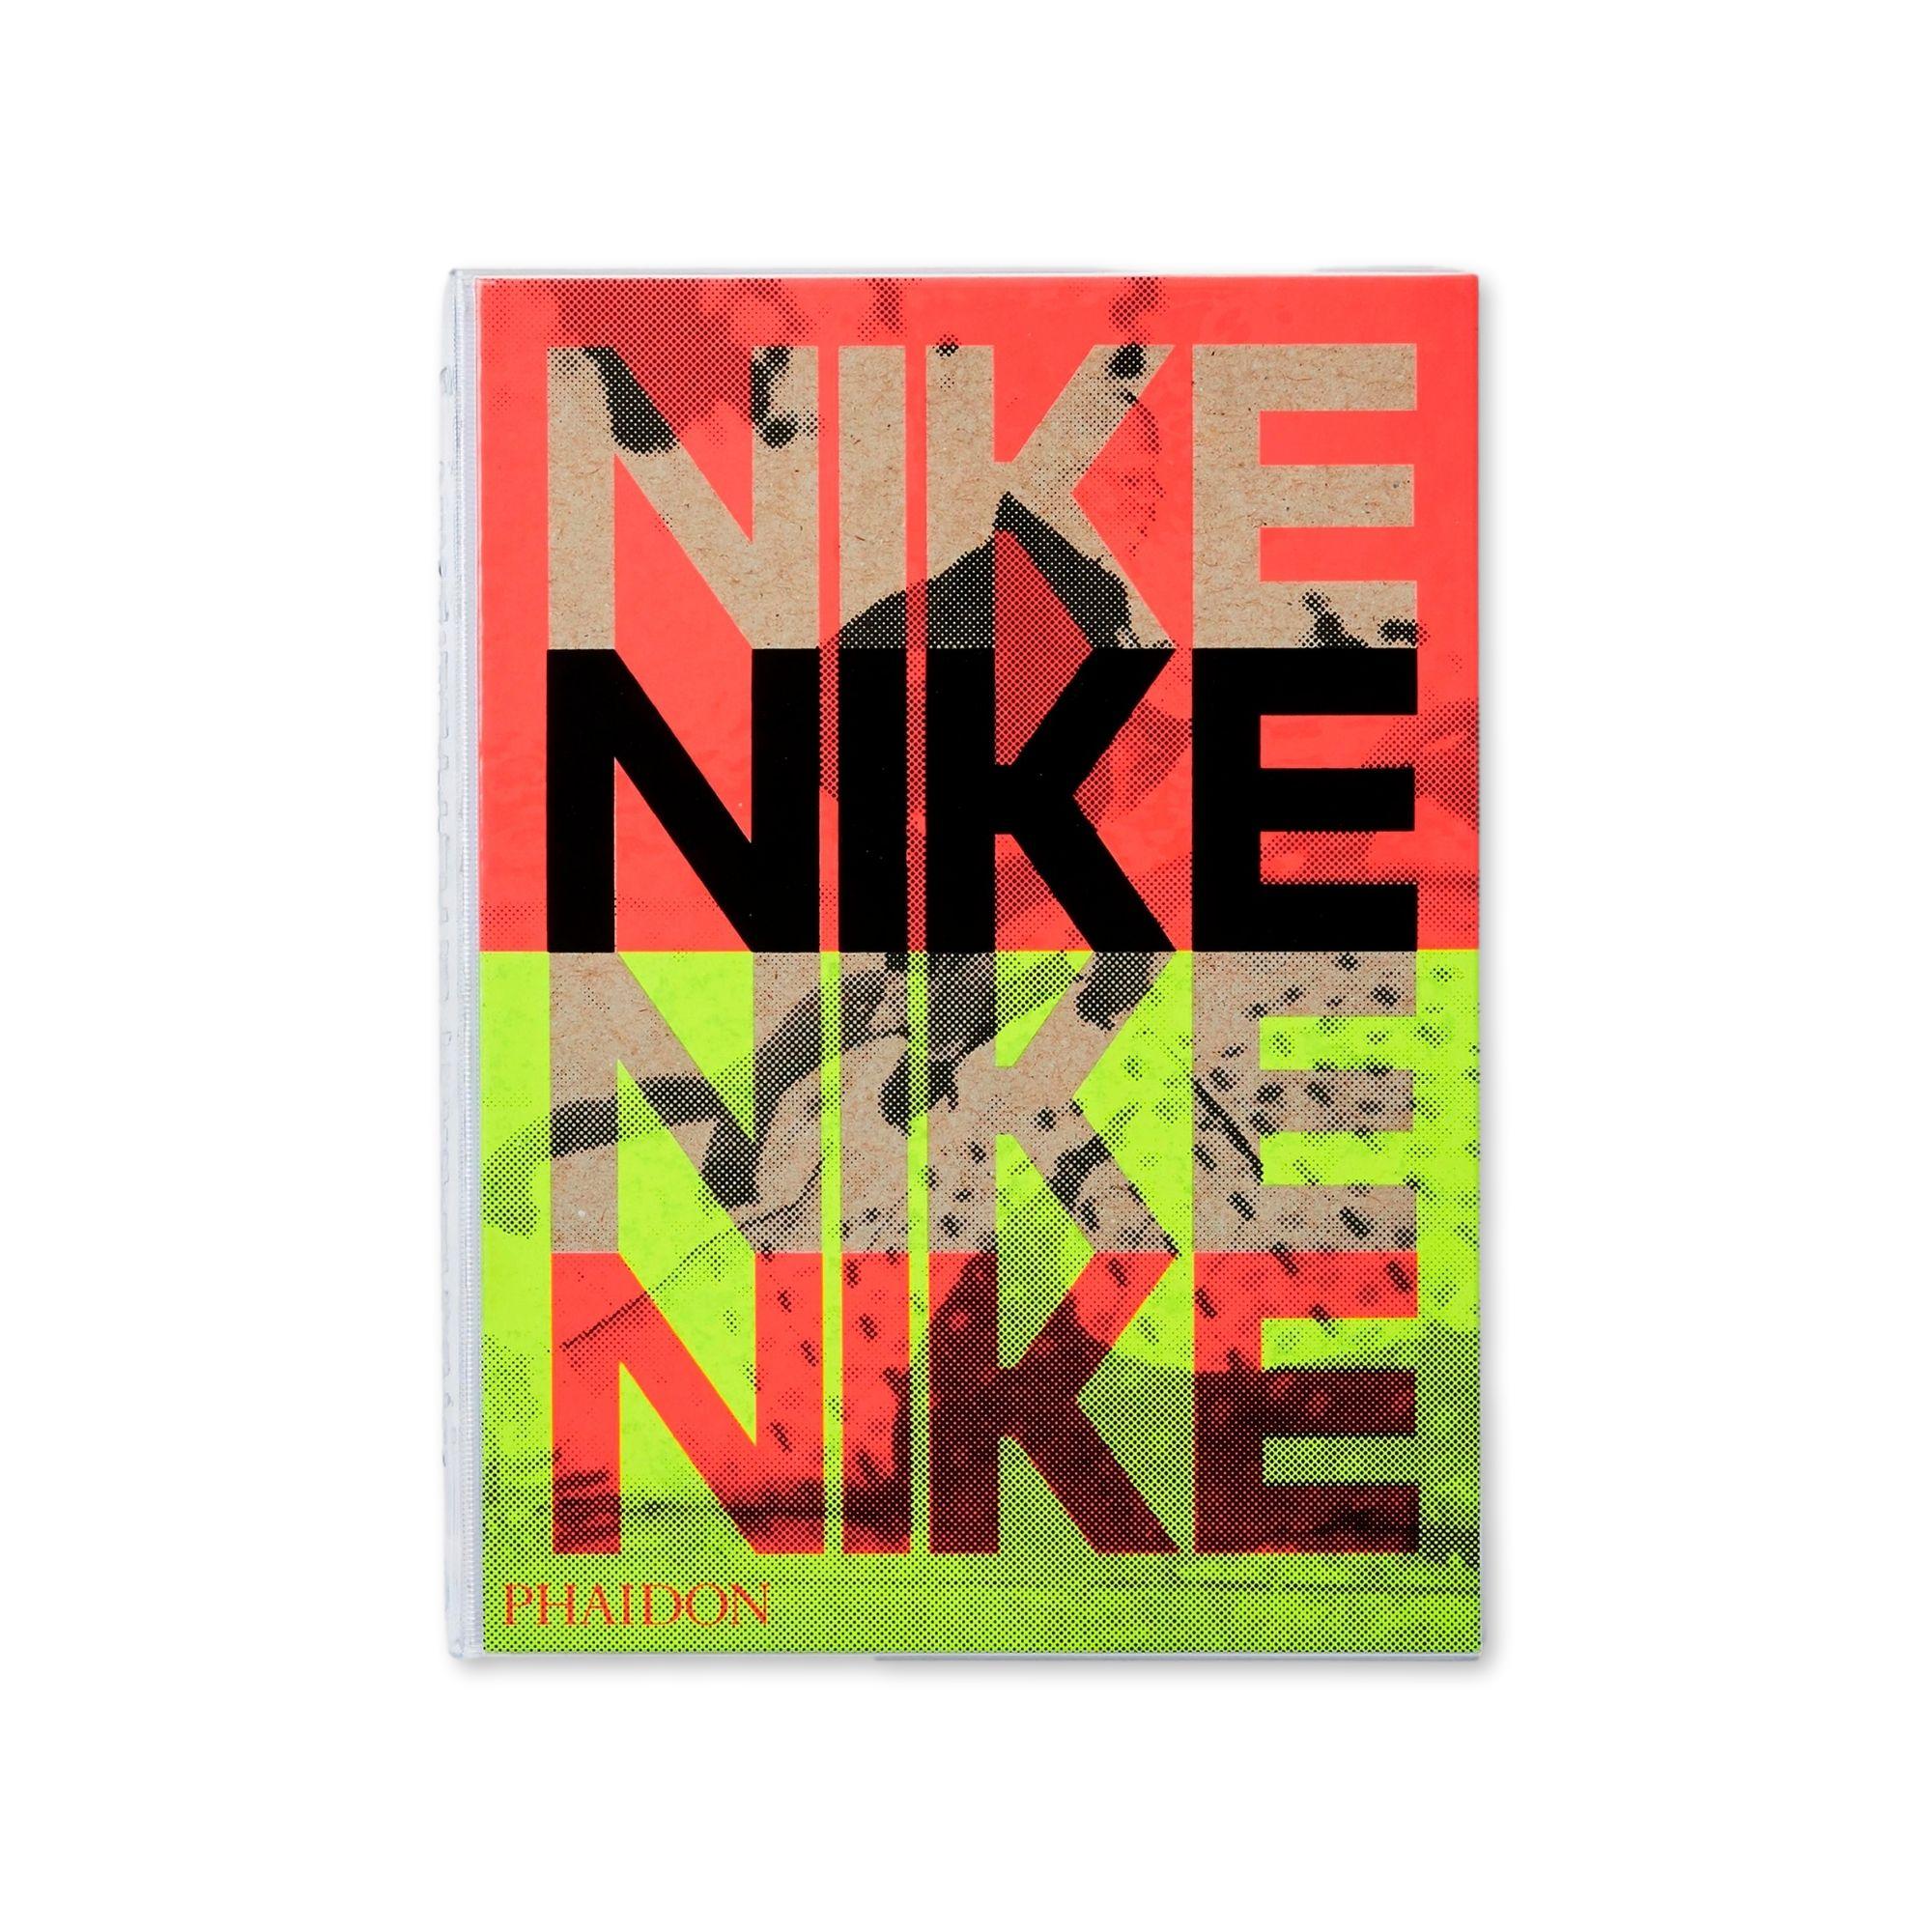 Nike: Better is Temporary Book Phaidon